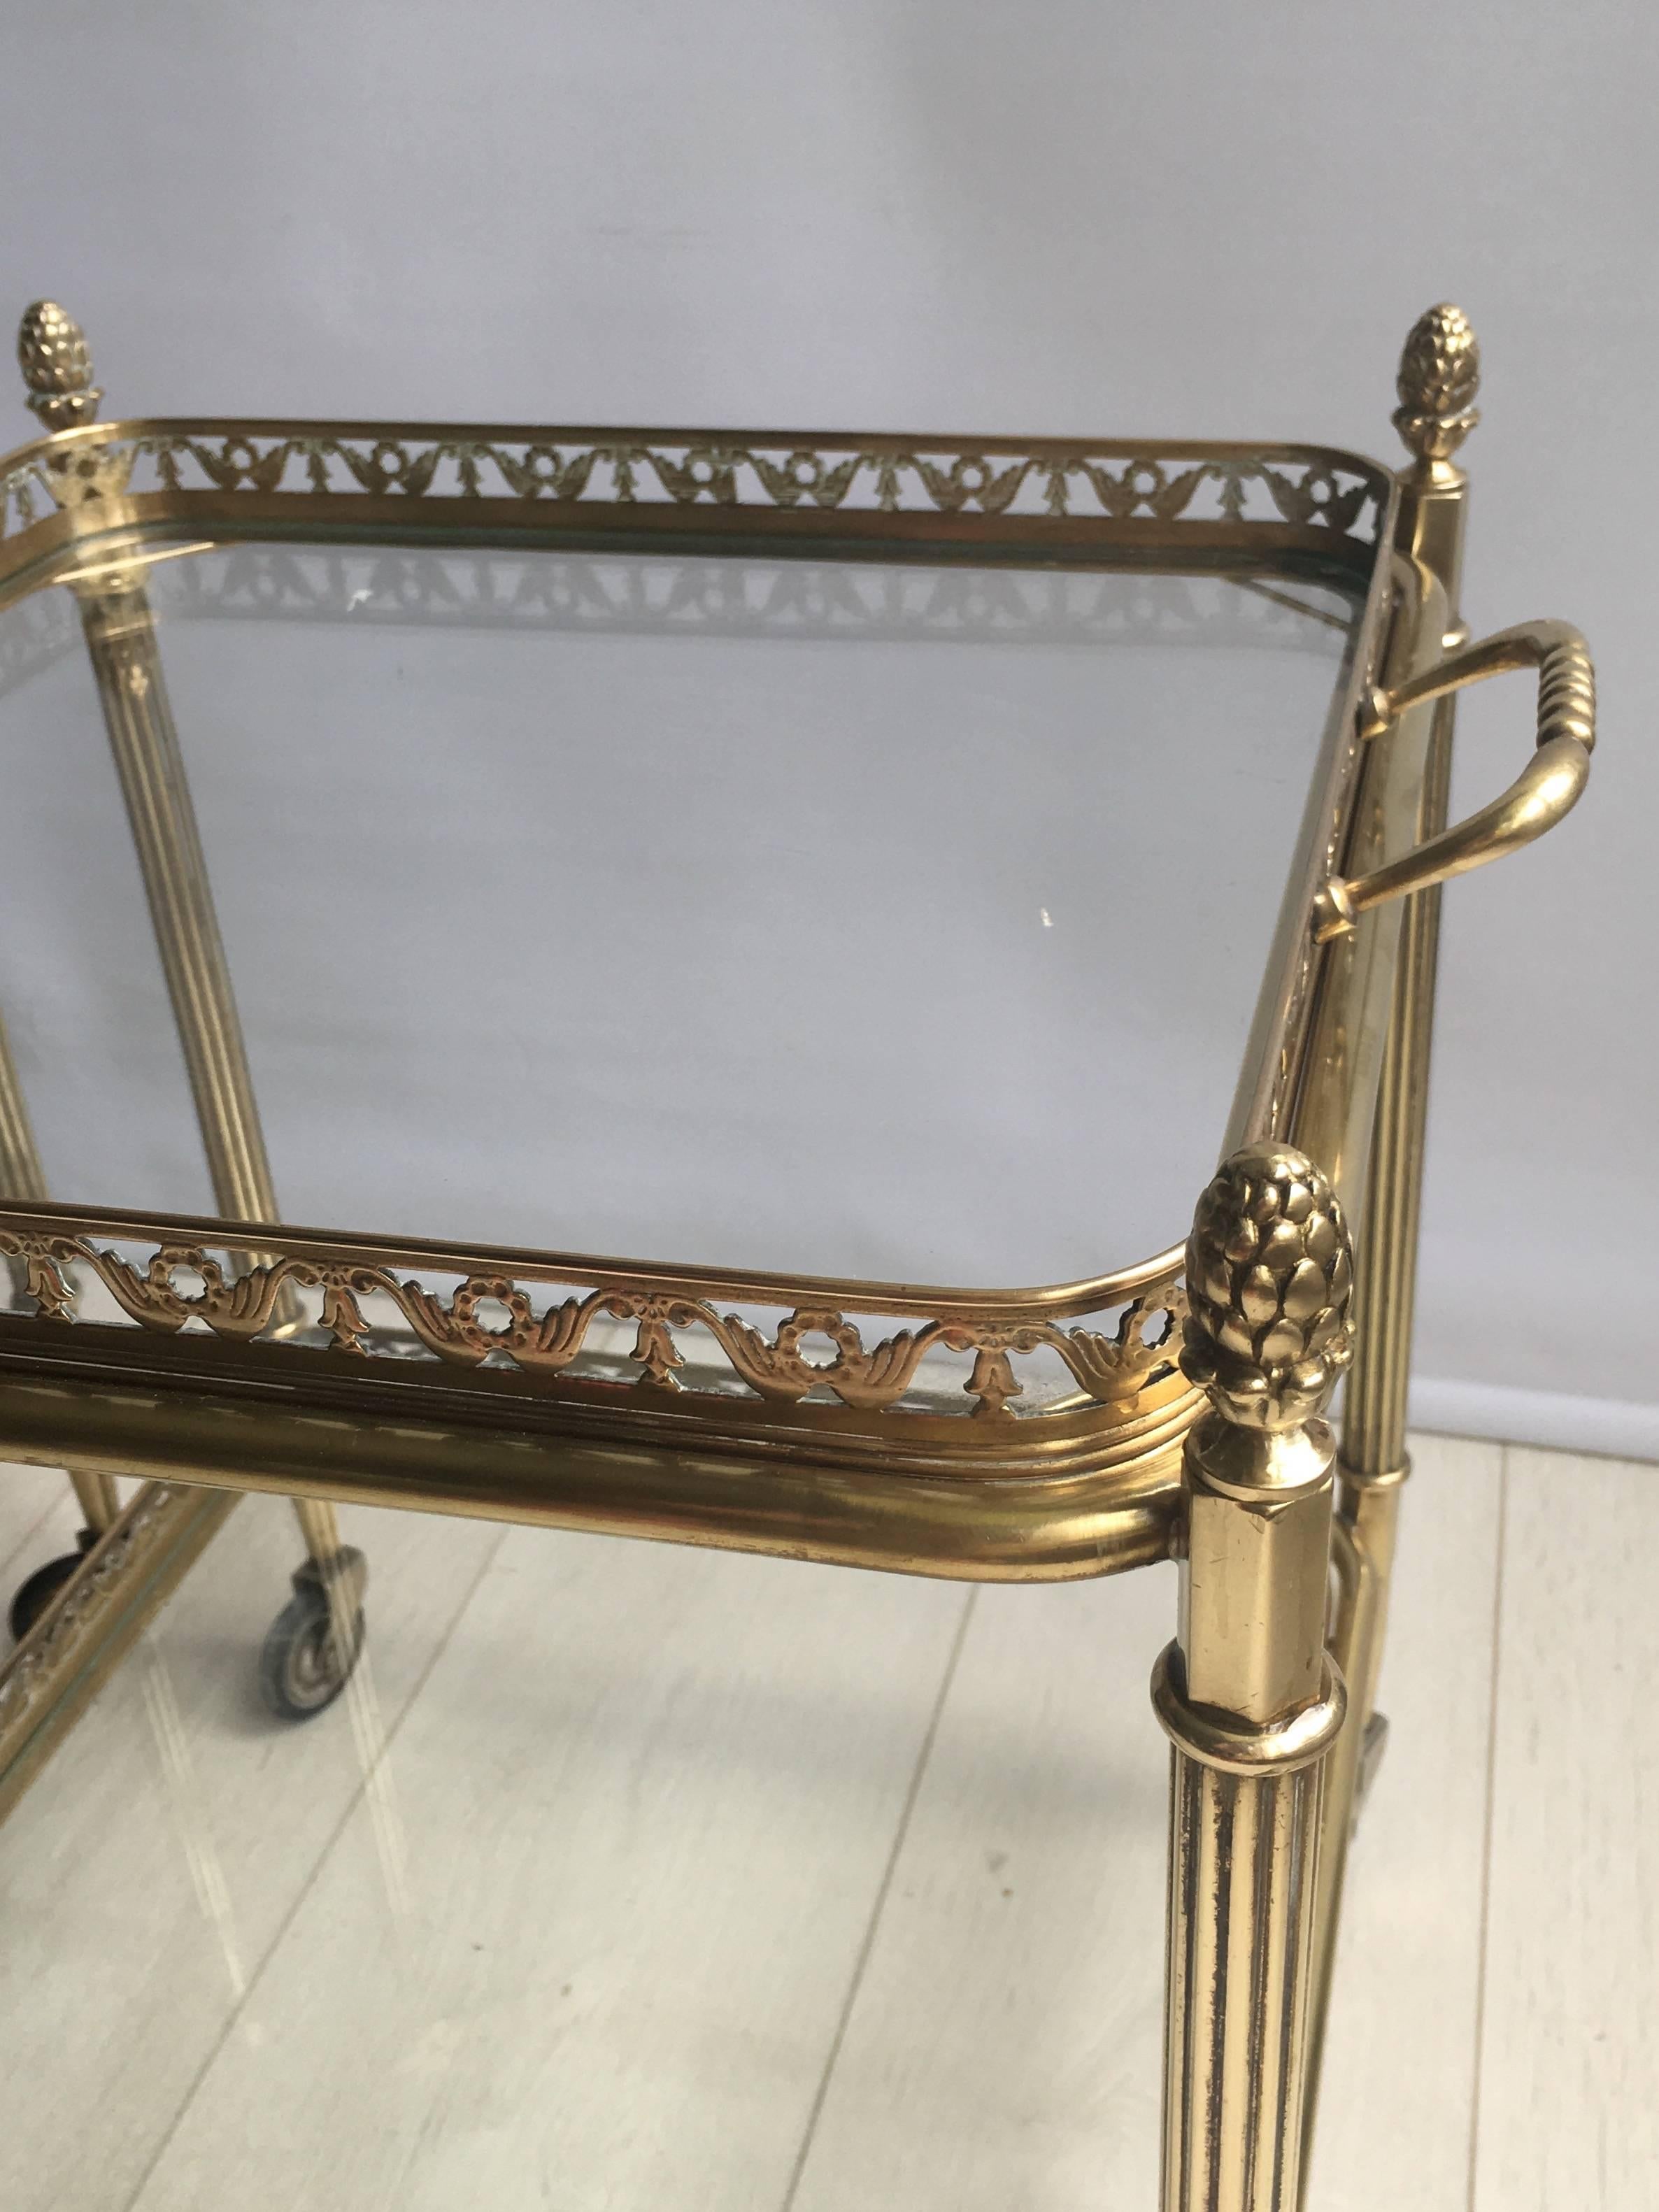 Perfect pair of brass side tables or trolleys from France, circa 1950

With decorative finials and lift off tray measuring 36cm square (44.5cm with handles)

Stands 46cm to glass, 51.5cm to finial.